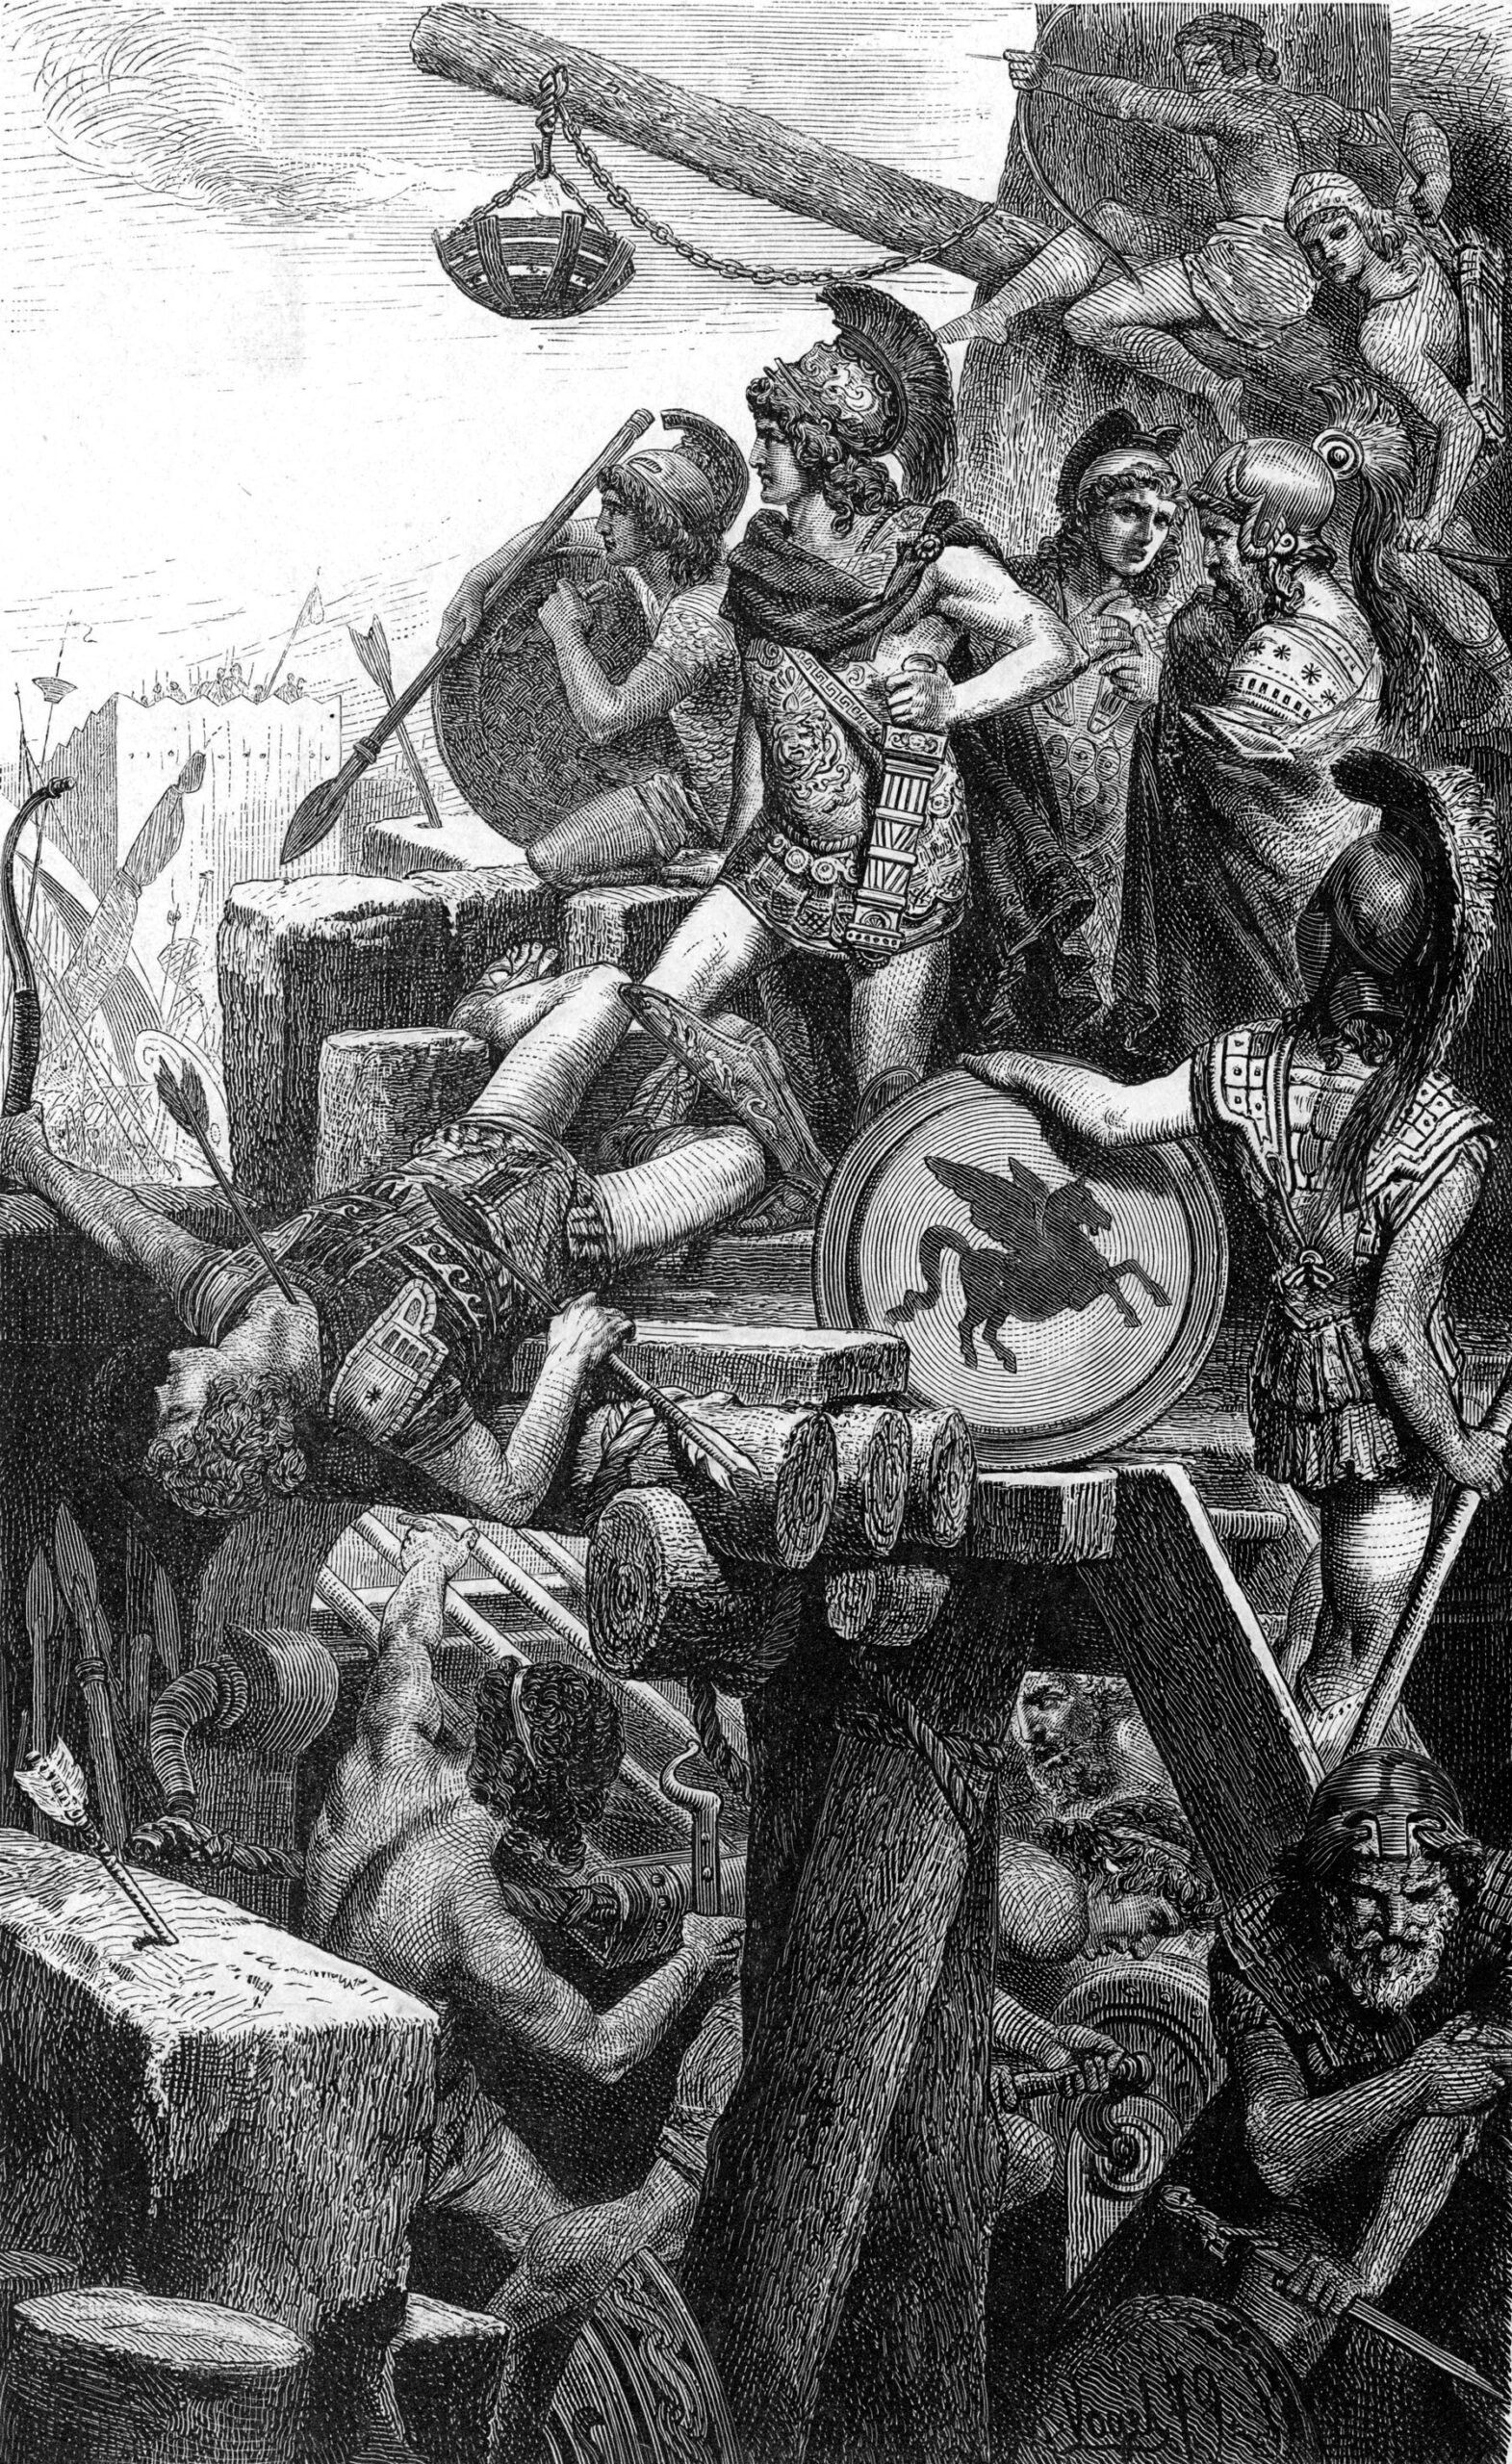 Alexander observes the progress of the assault on Tyre from atop one of his mammoth siege engines in a modern illustration. After attempts to breach the city from the causeway failed, Alexander equipped allied Phoenician ships with rams, towers, and boarding bridges. 